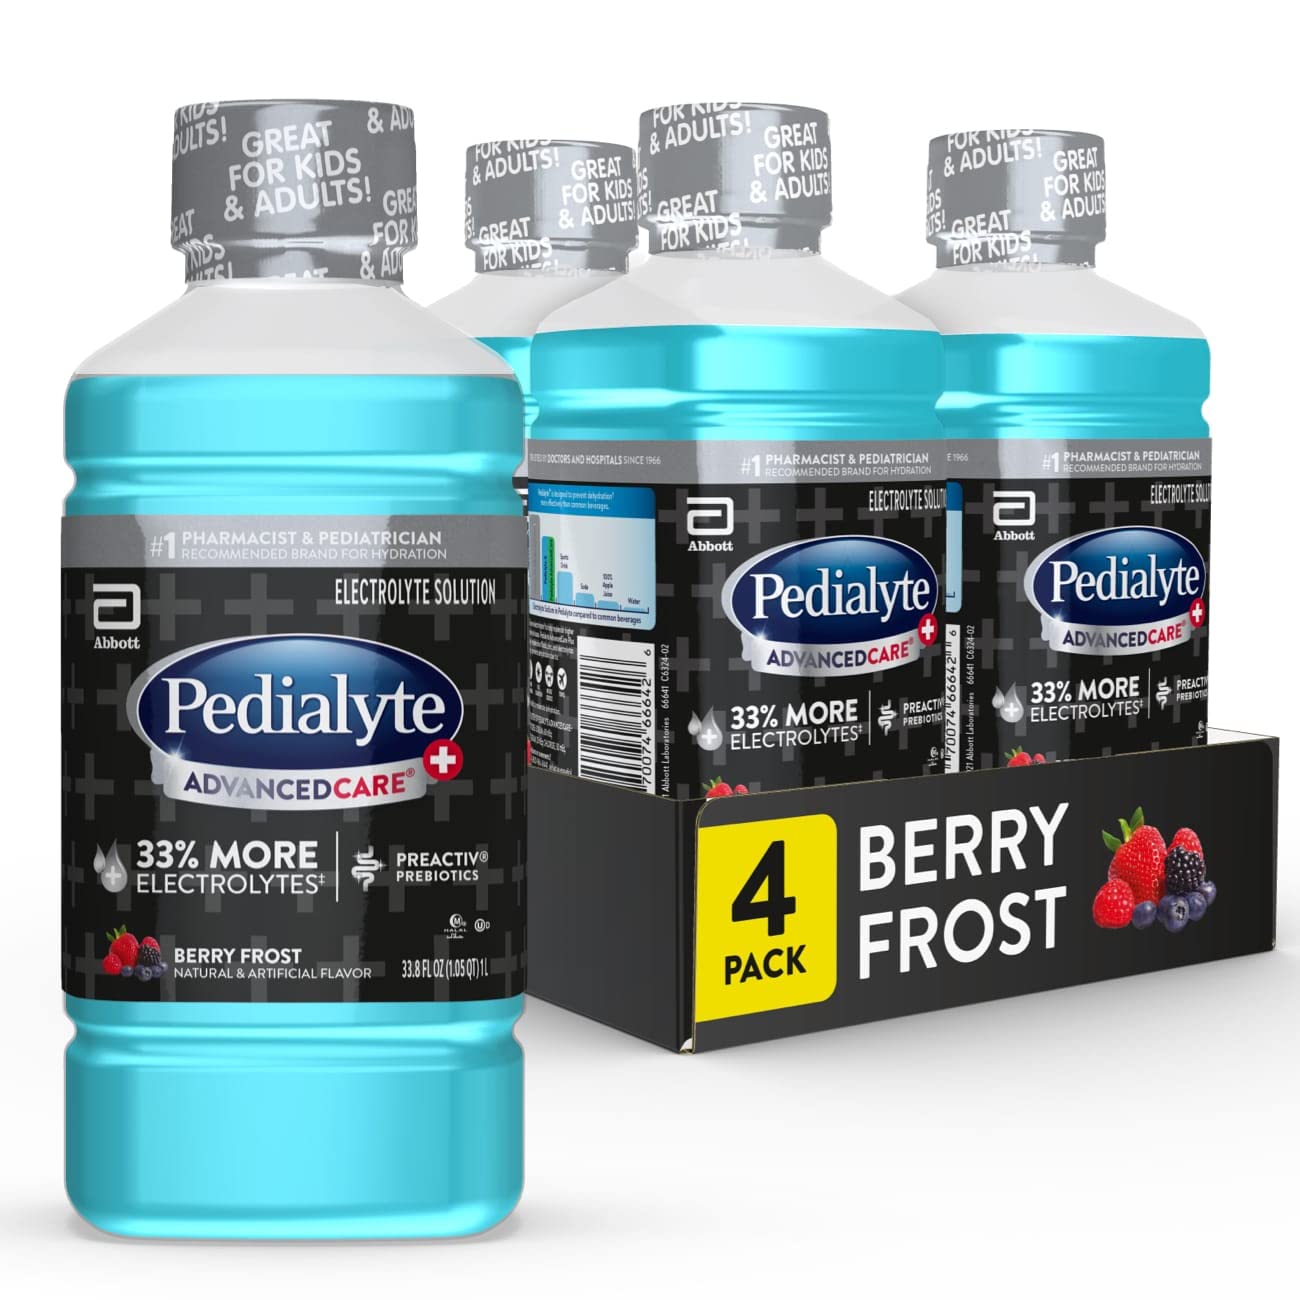 Pedialyte Berry Frost